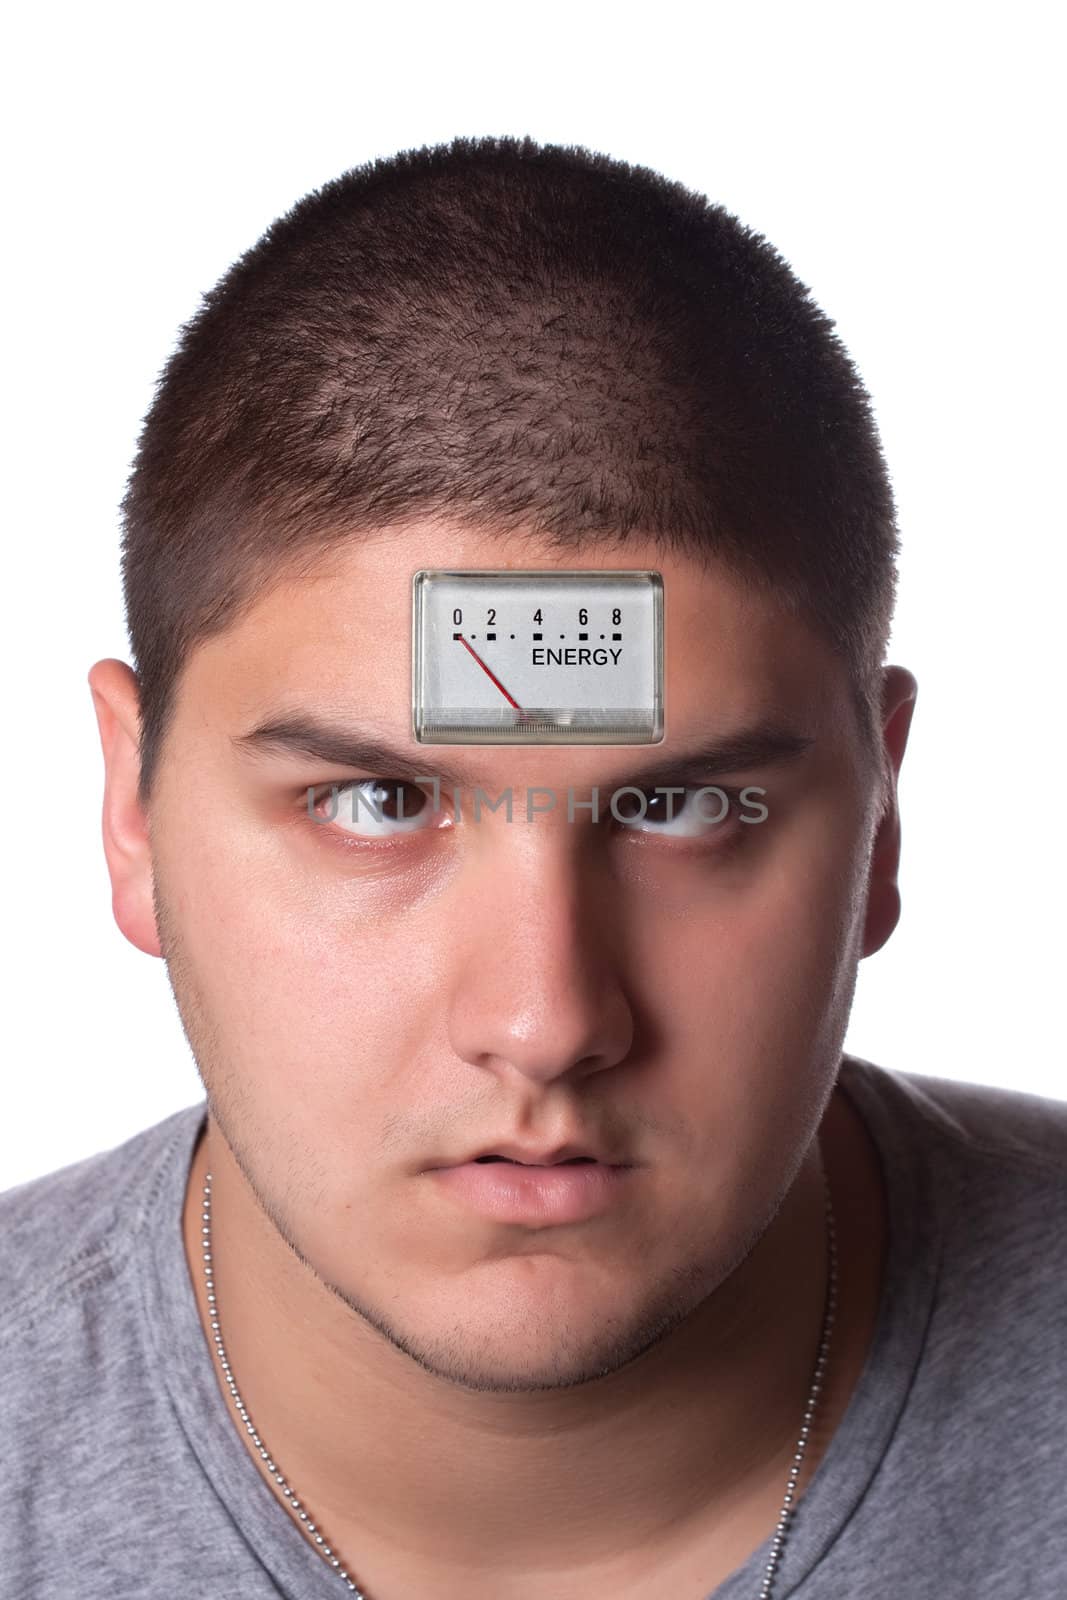 Conceptual image of a young man with a low energy meter on his forehead to illustrate tiredness.